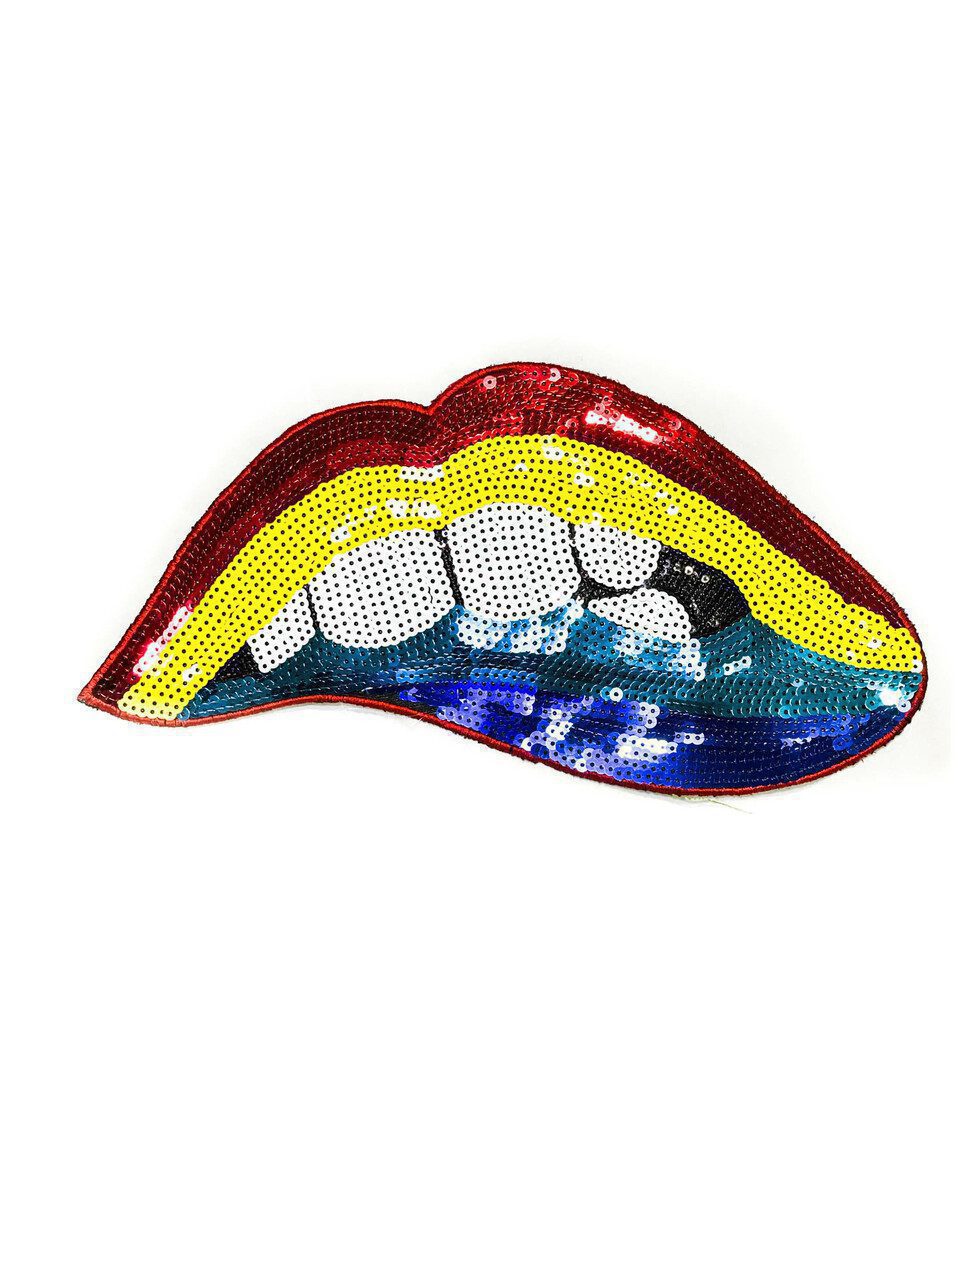 Yellow lipstick Iron on sequin patches - Creo Piece